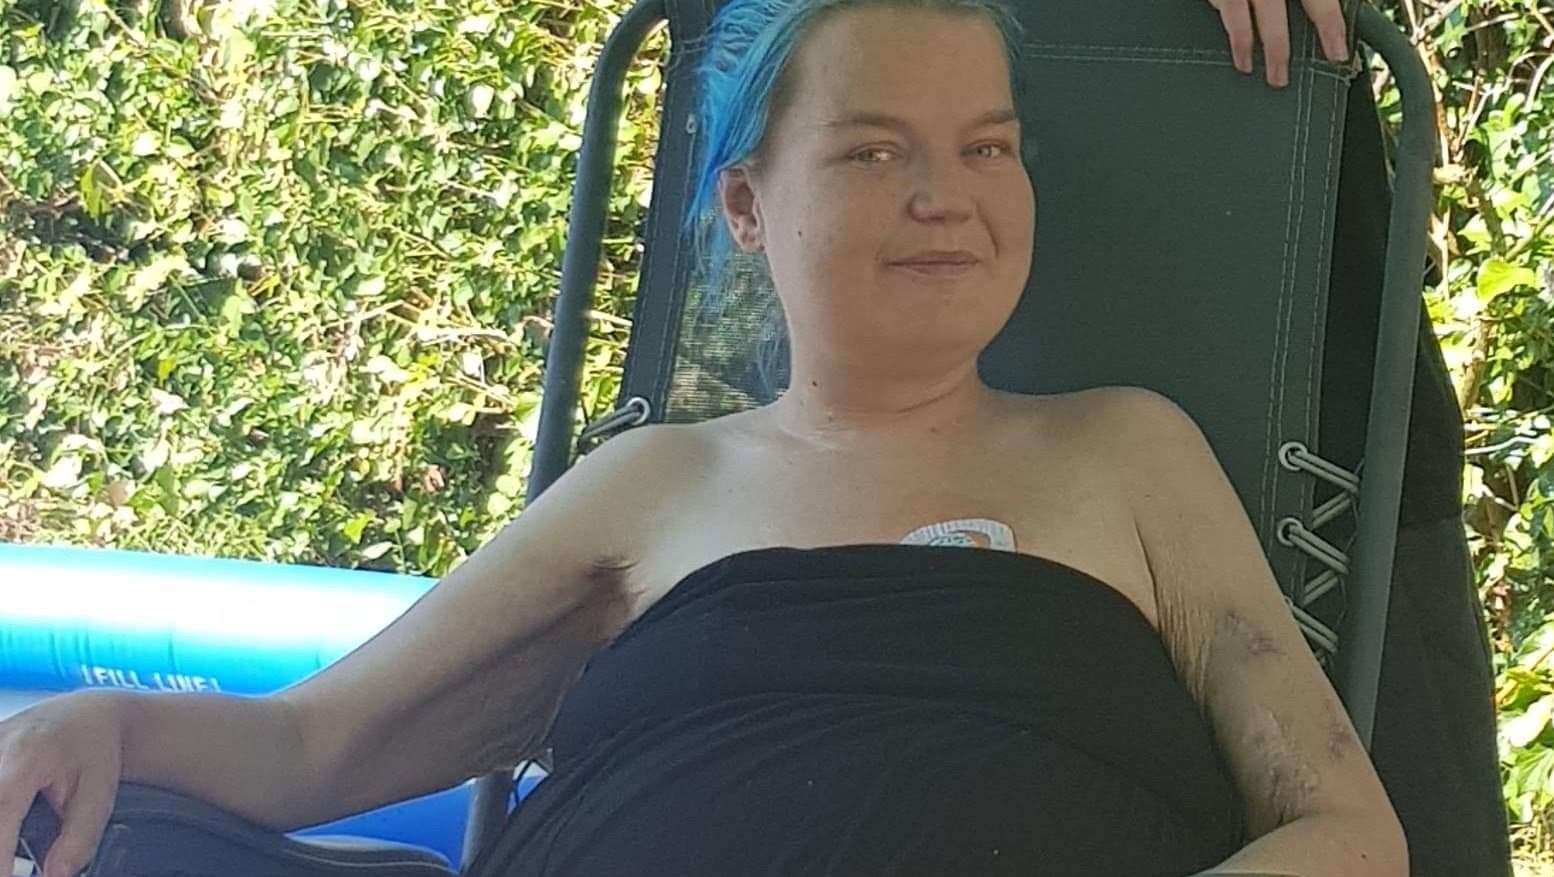 Stacey Jervis, 33, has been given just two months to live. Photo: Lisa Wyatt Jervis